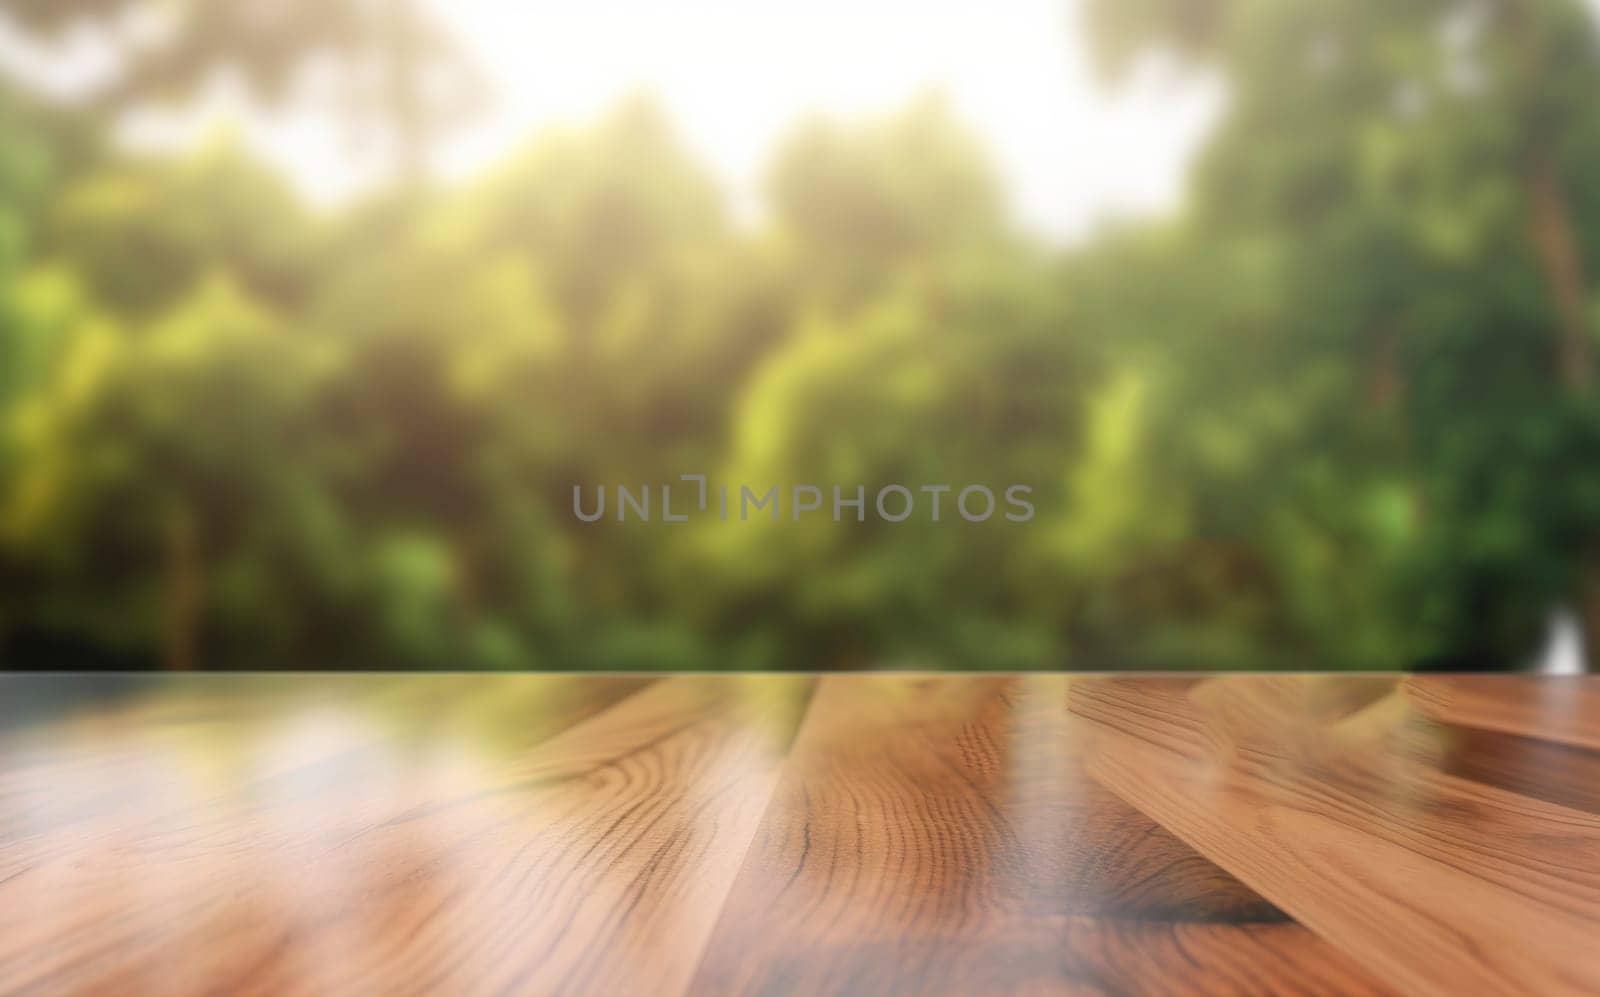 An empty, smooth wooden countertop with a view of blurred green trees.